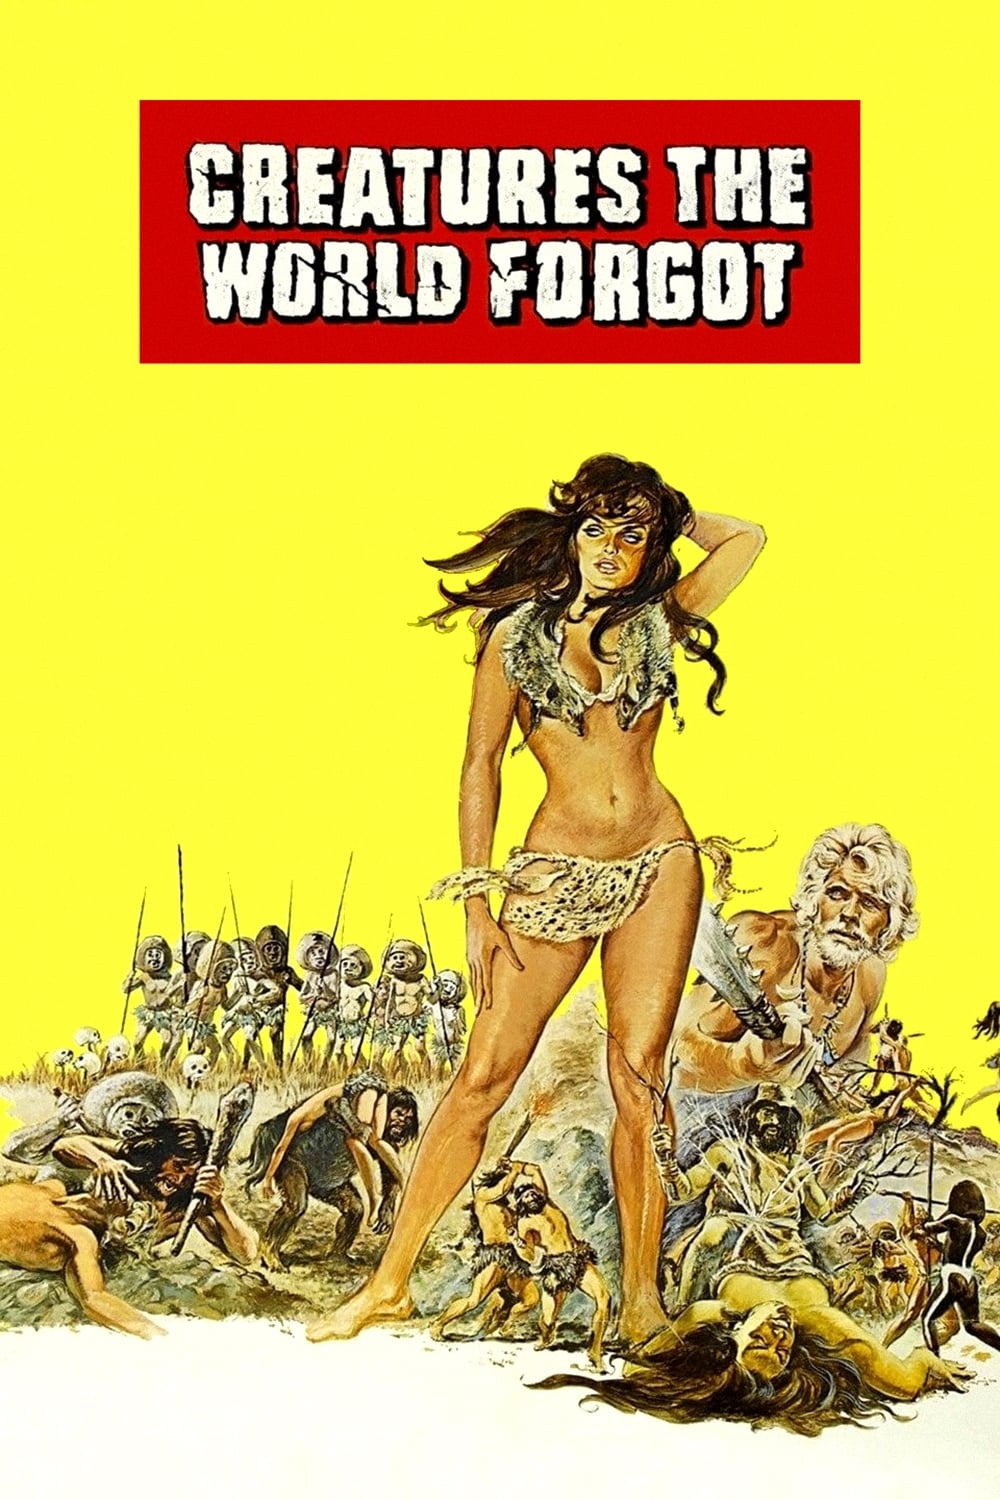 Creatures the World Forgot (1971)